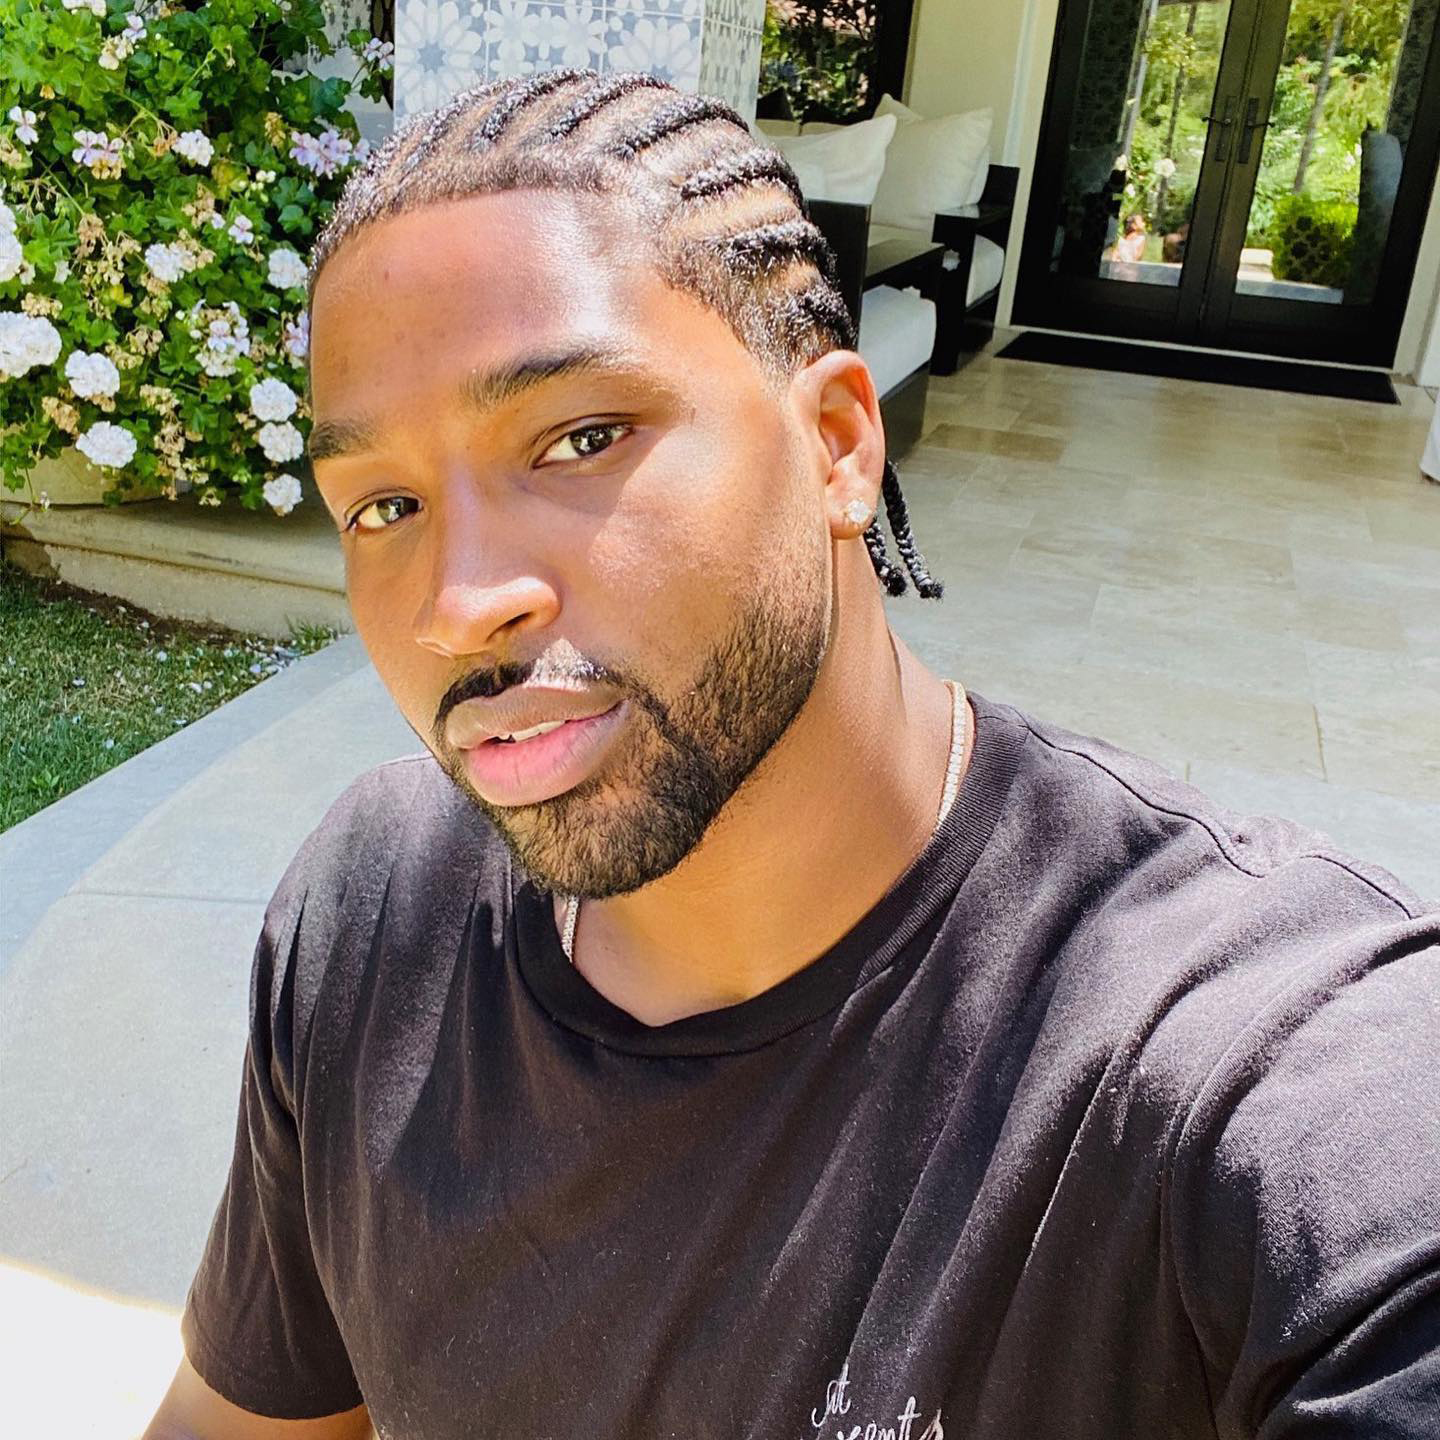 Tristan Thompson Shares Cryptic Post About Not Feeling 'Guilty' About the Past Amid Paternity Drama